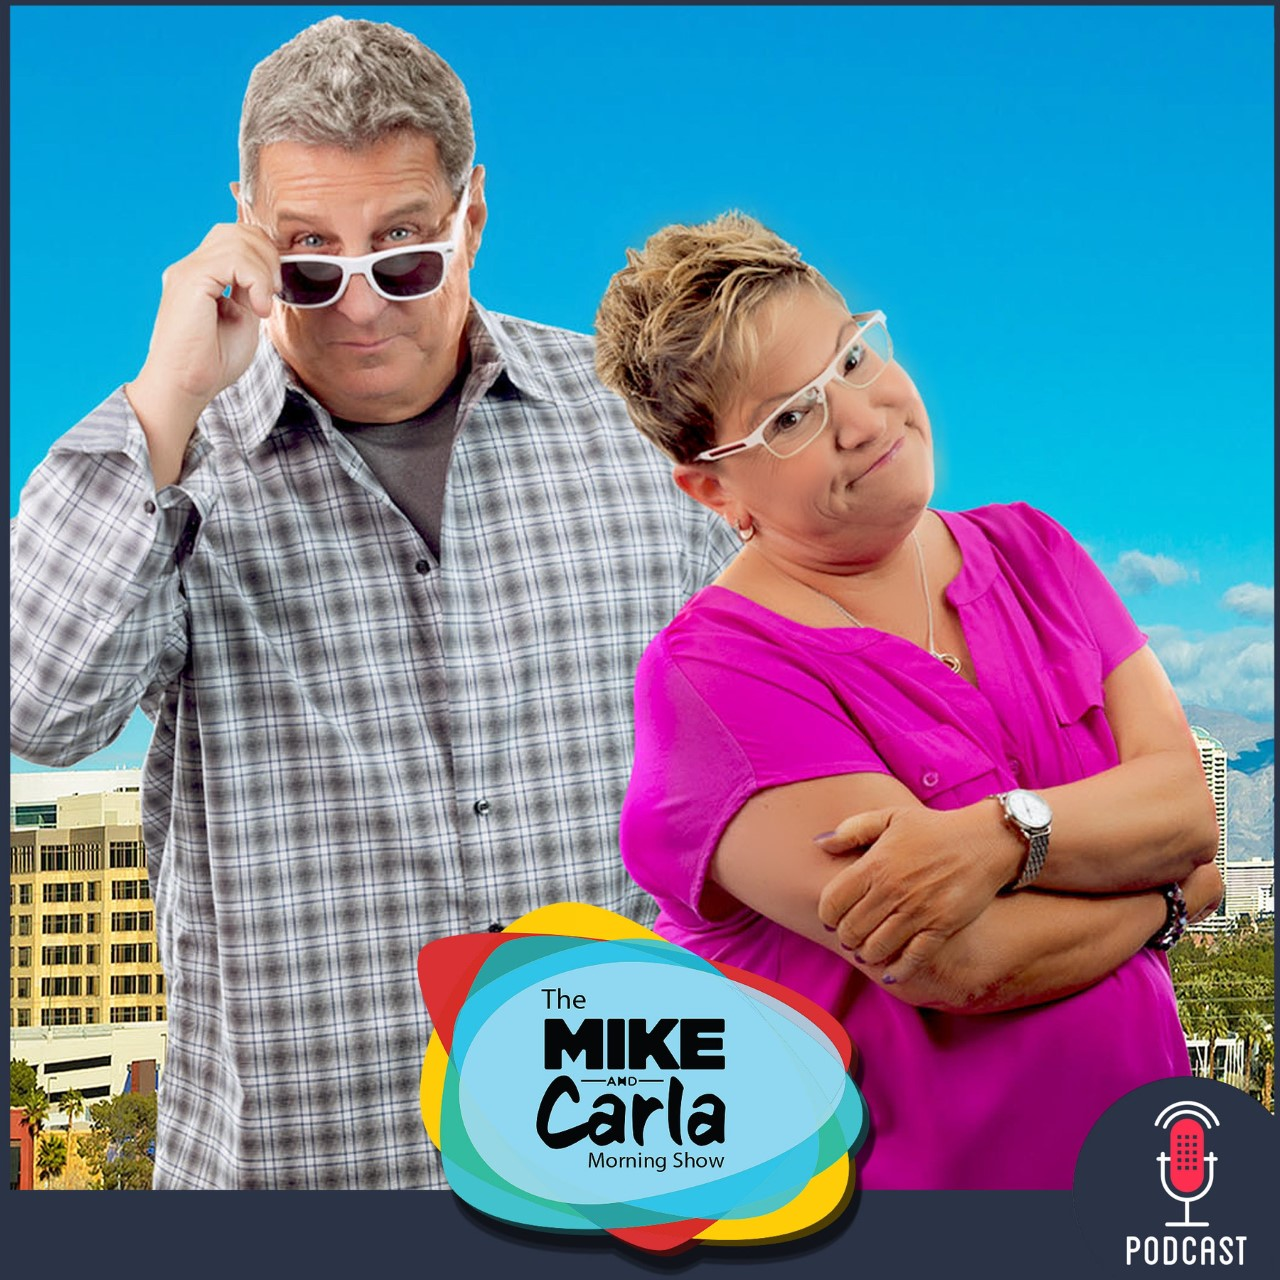 Mike & Carla Morning Show Podcast: Show #2108